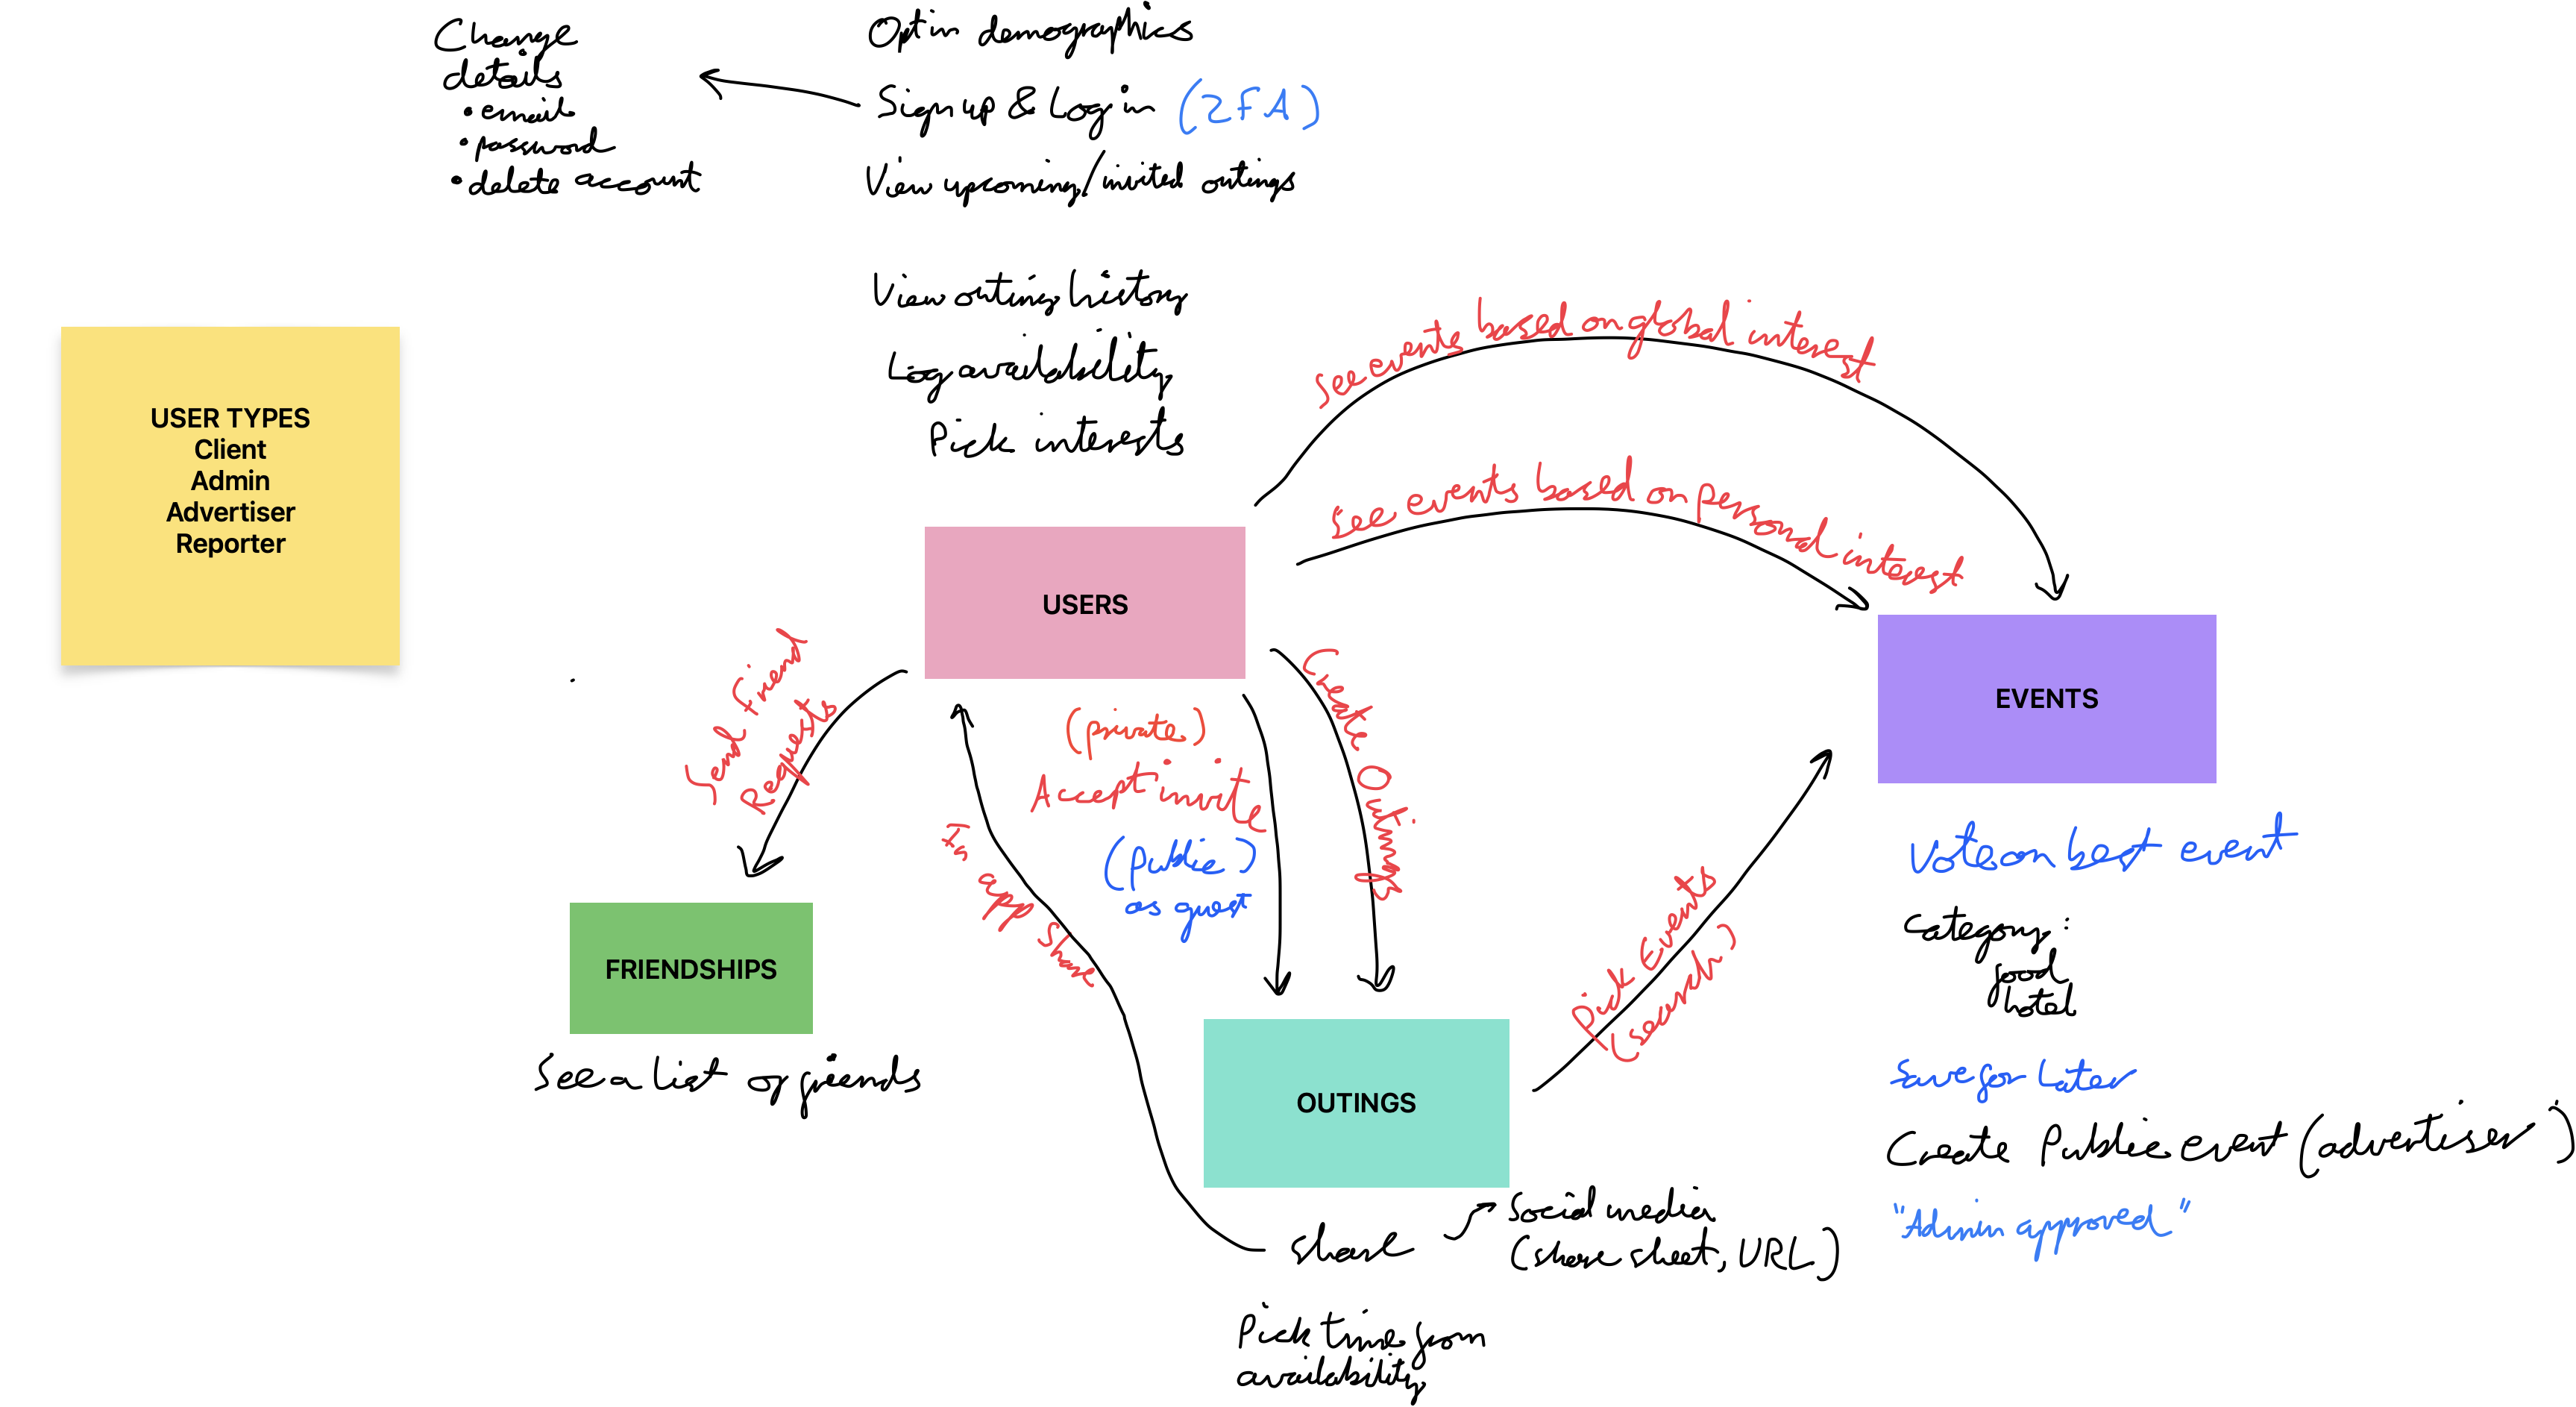 image of a mindmap for all the features of the app